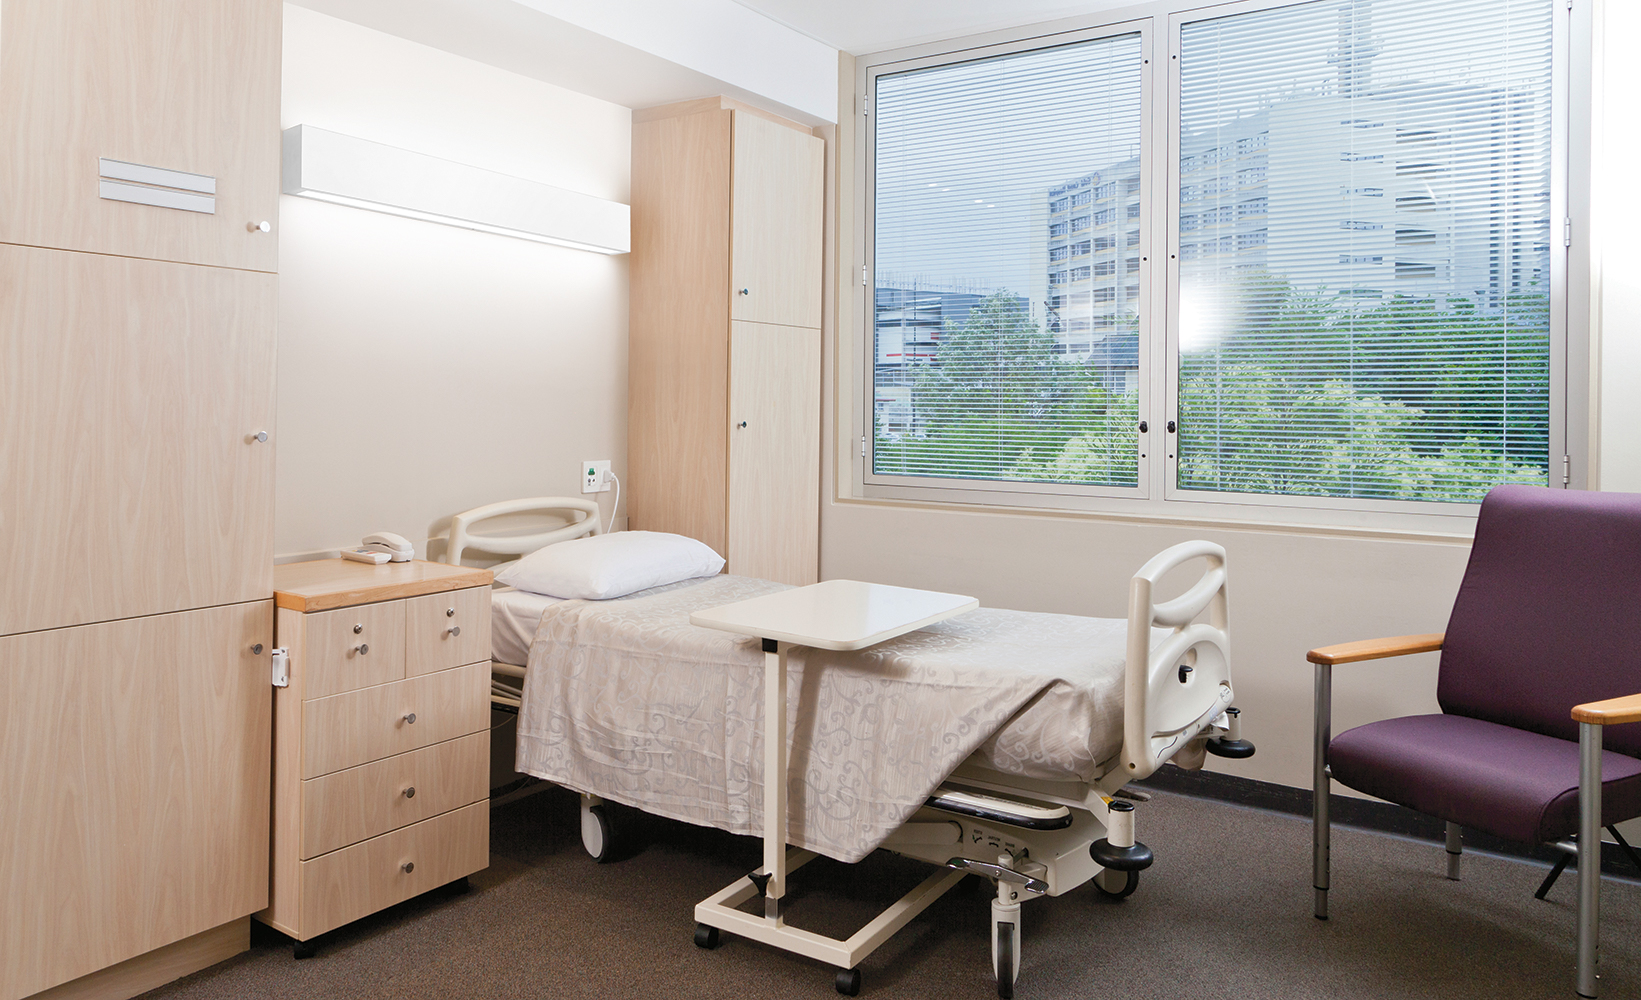 Linear Art Sconce as patient room lighting, mounted horizontally above the patient bed overlooking a large window.